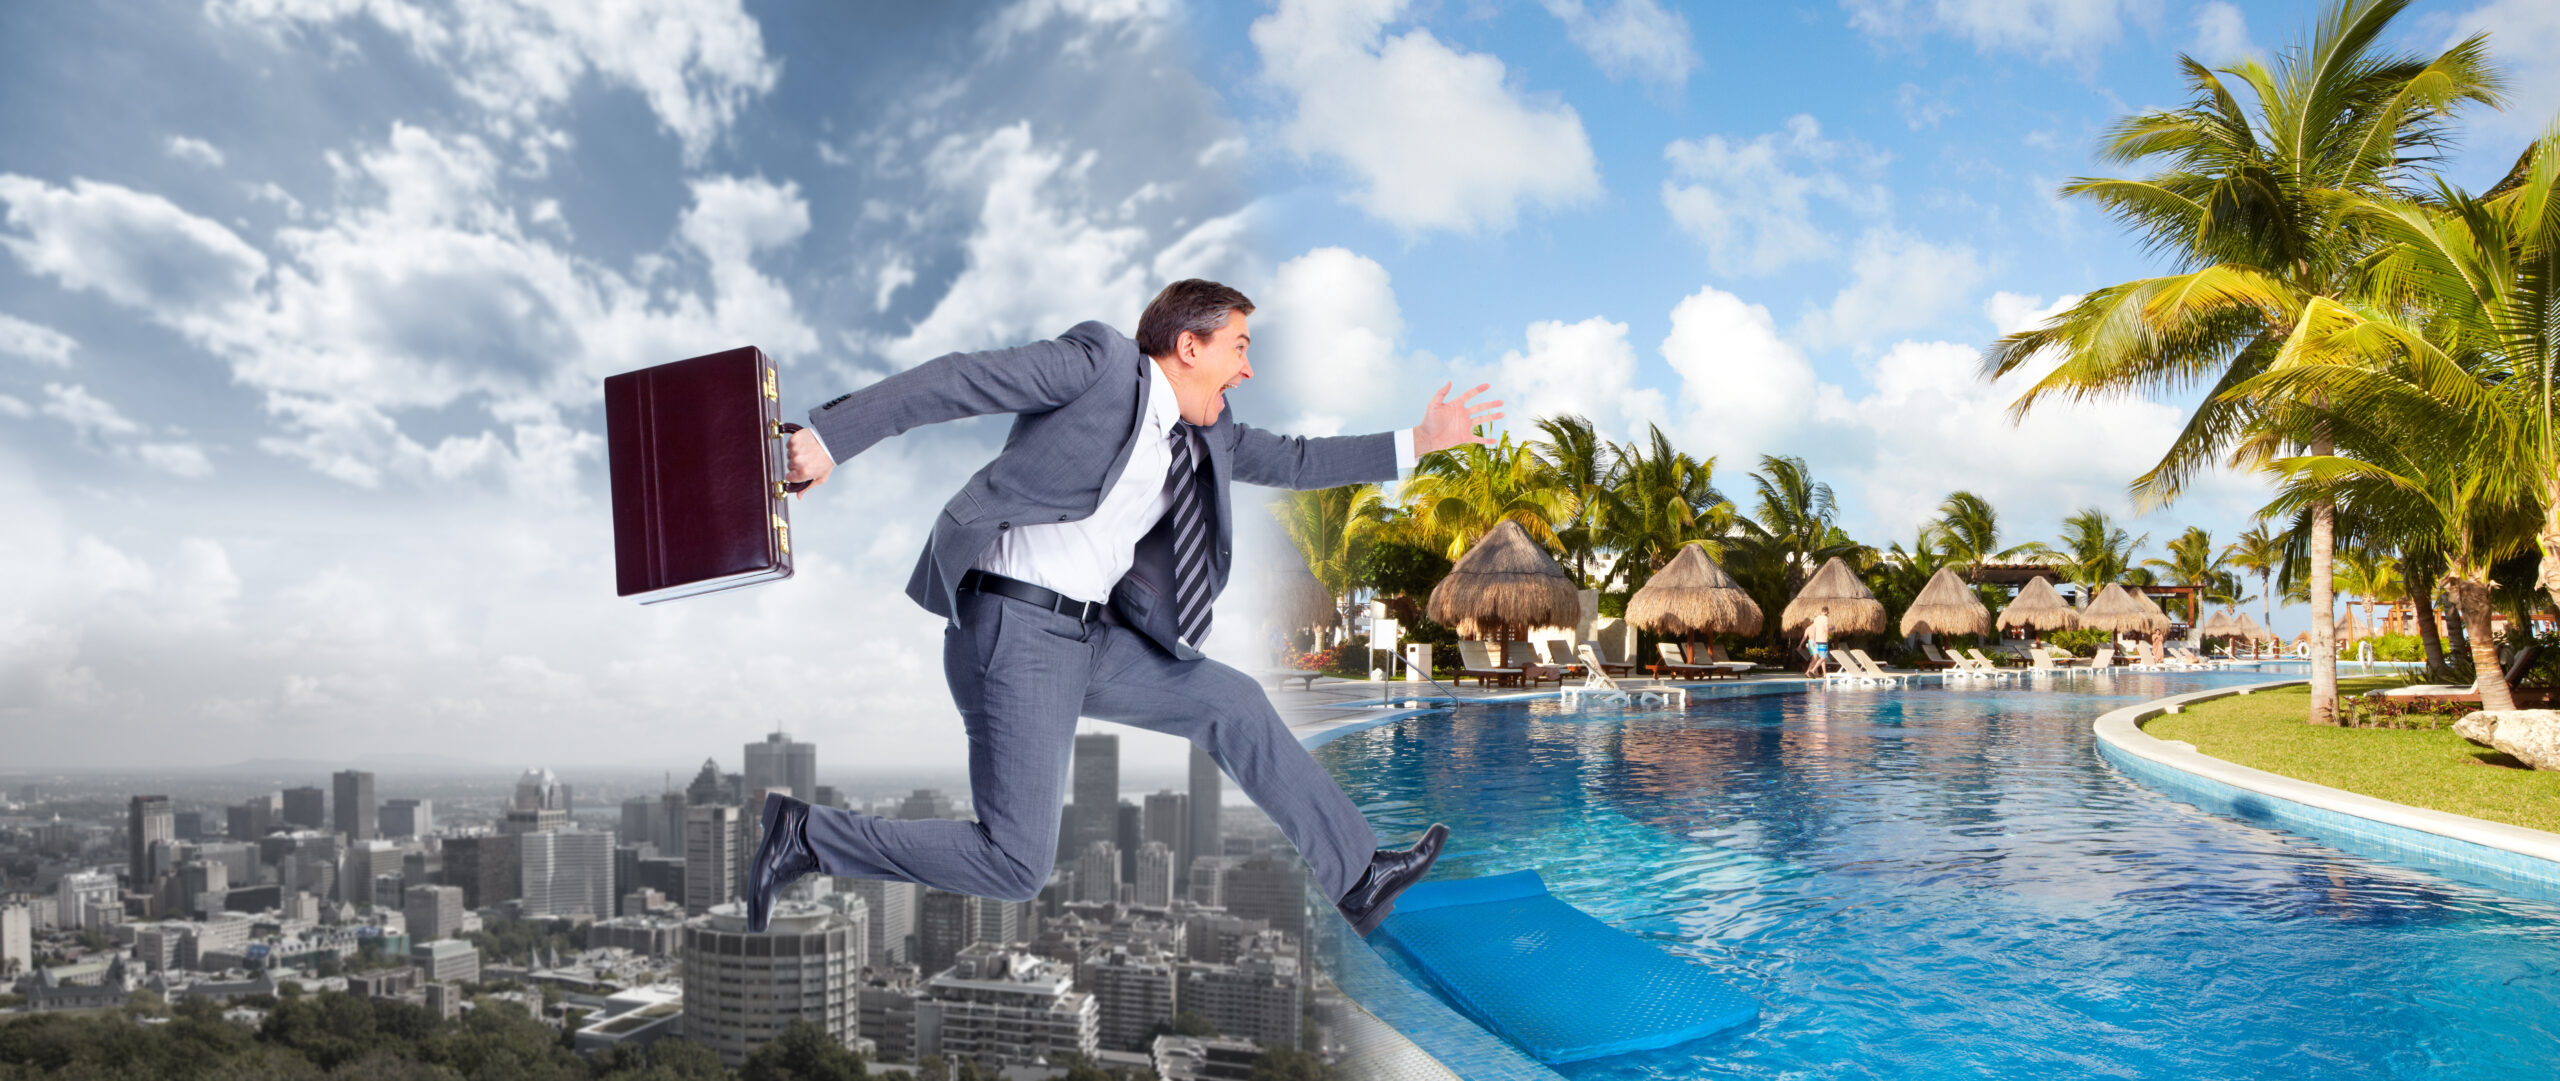 5 Things that Going On Vacation Reveals about Your Business